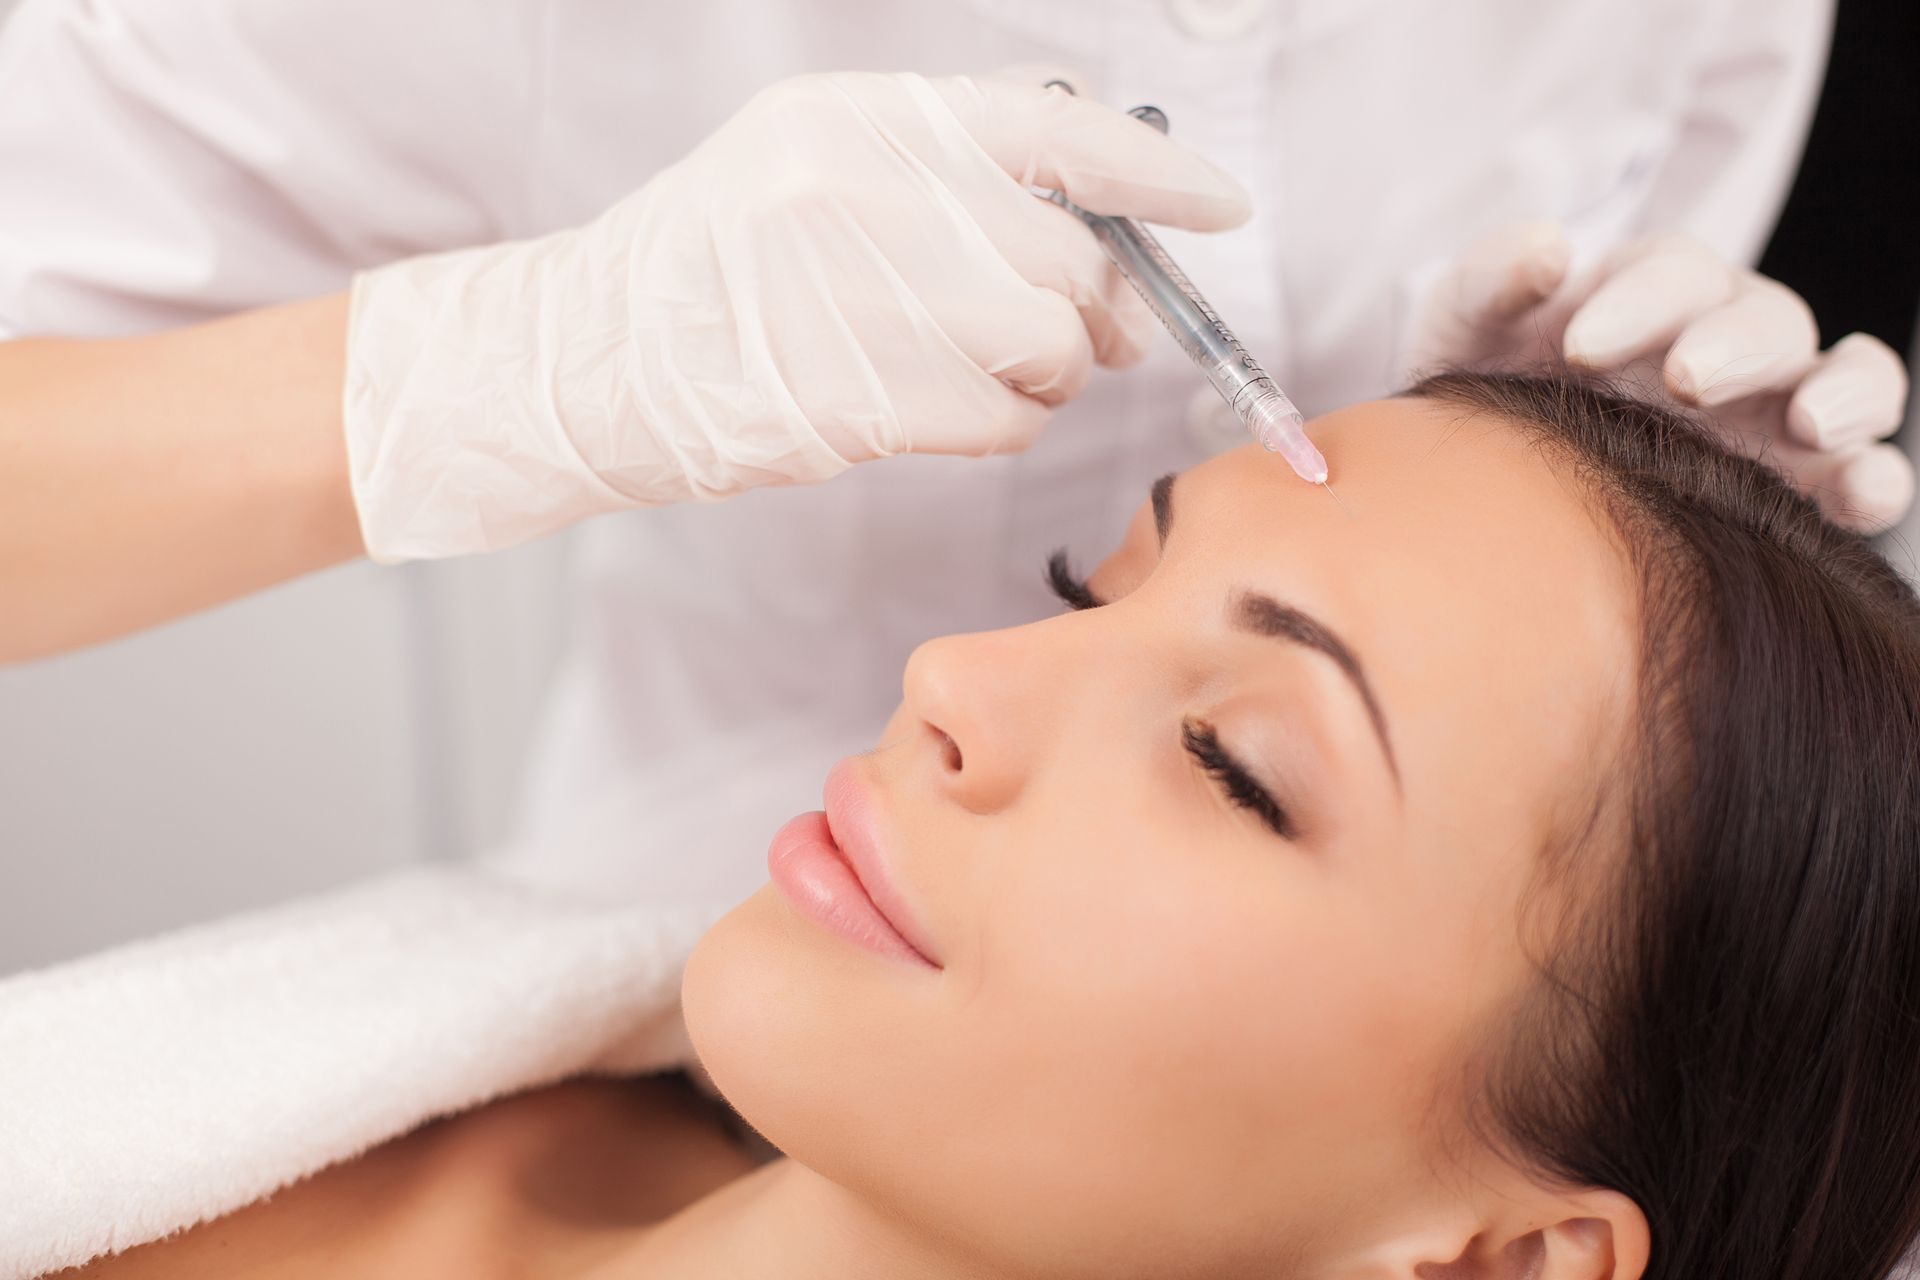 A woman is getting a botox injection on her forehead.